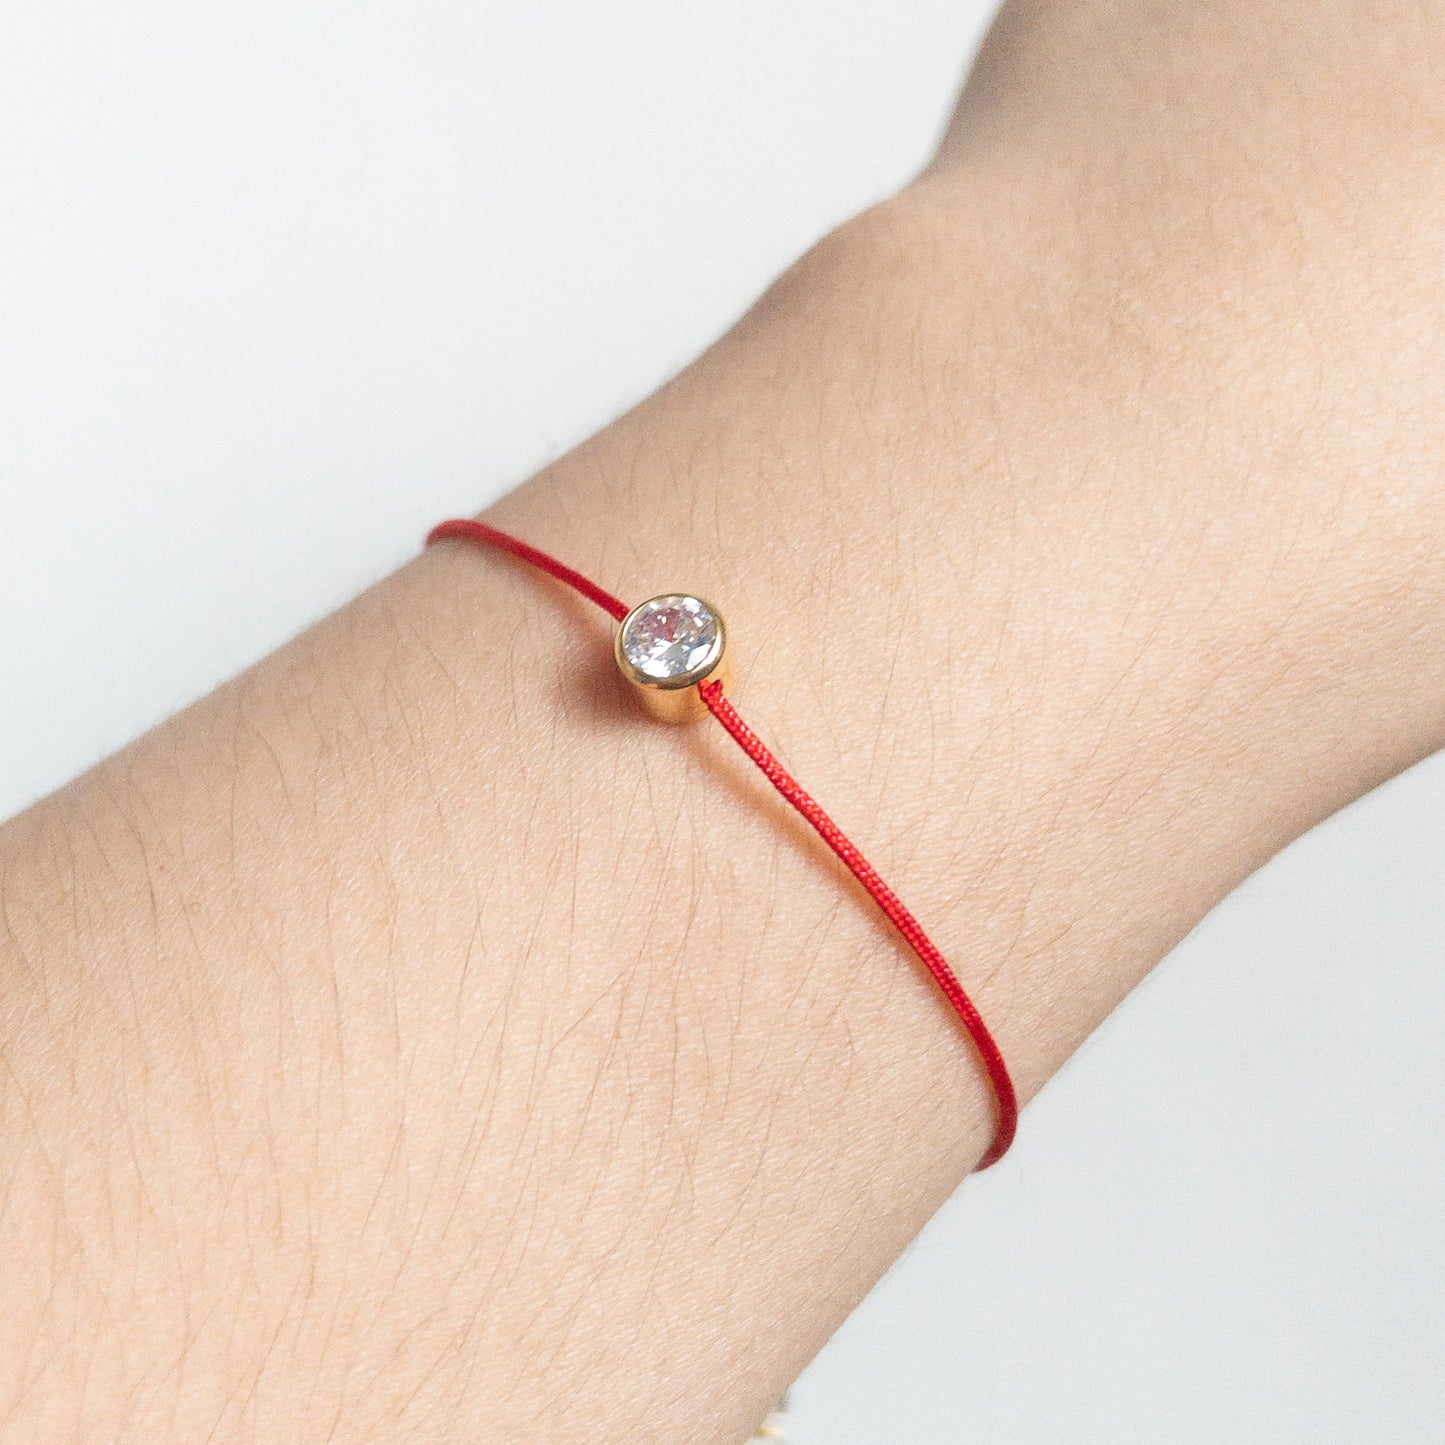 The Red Line Solitaire Bracelet